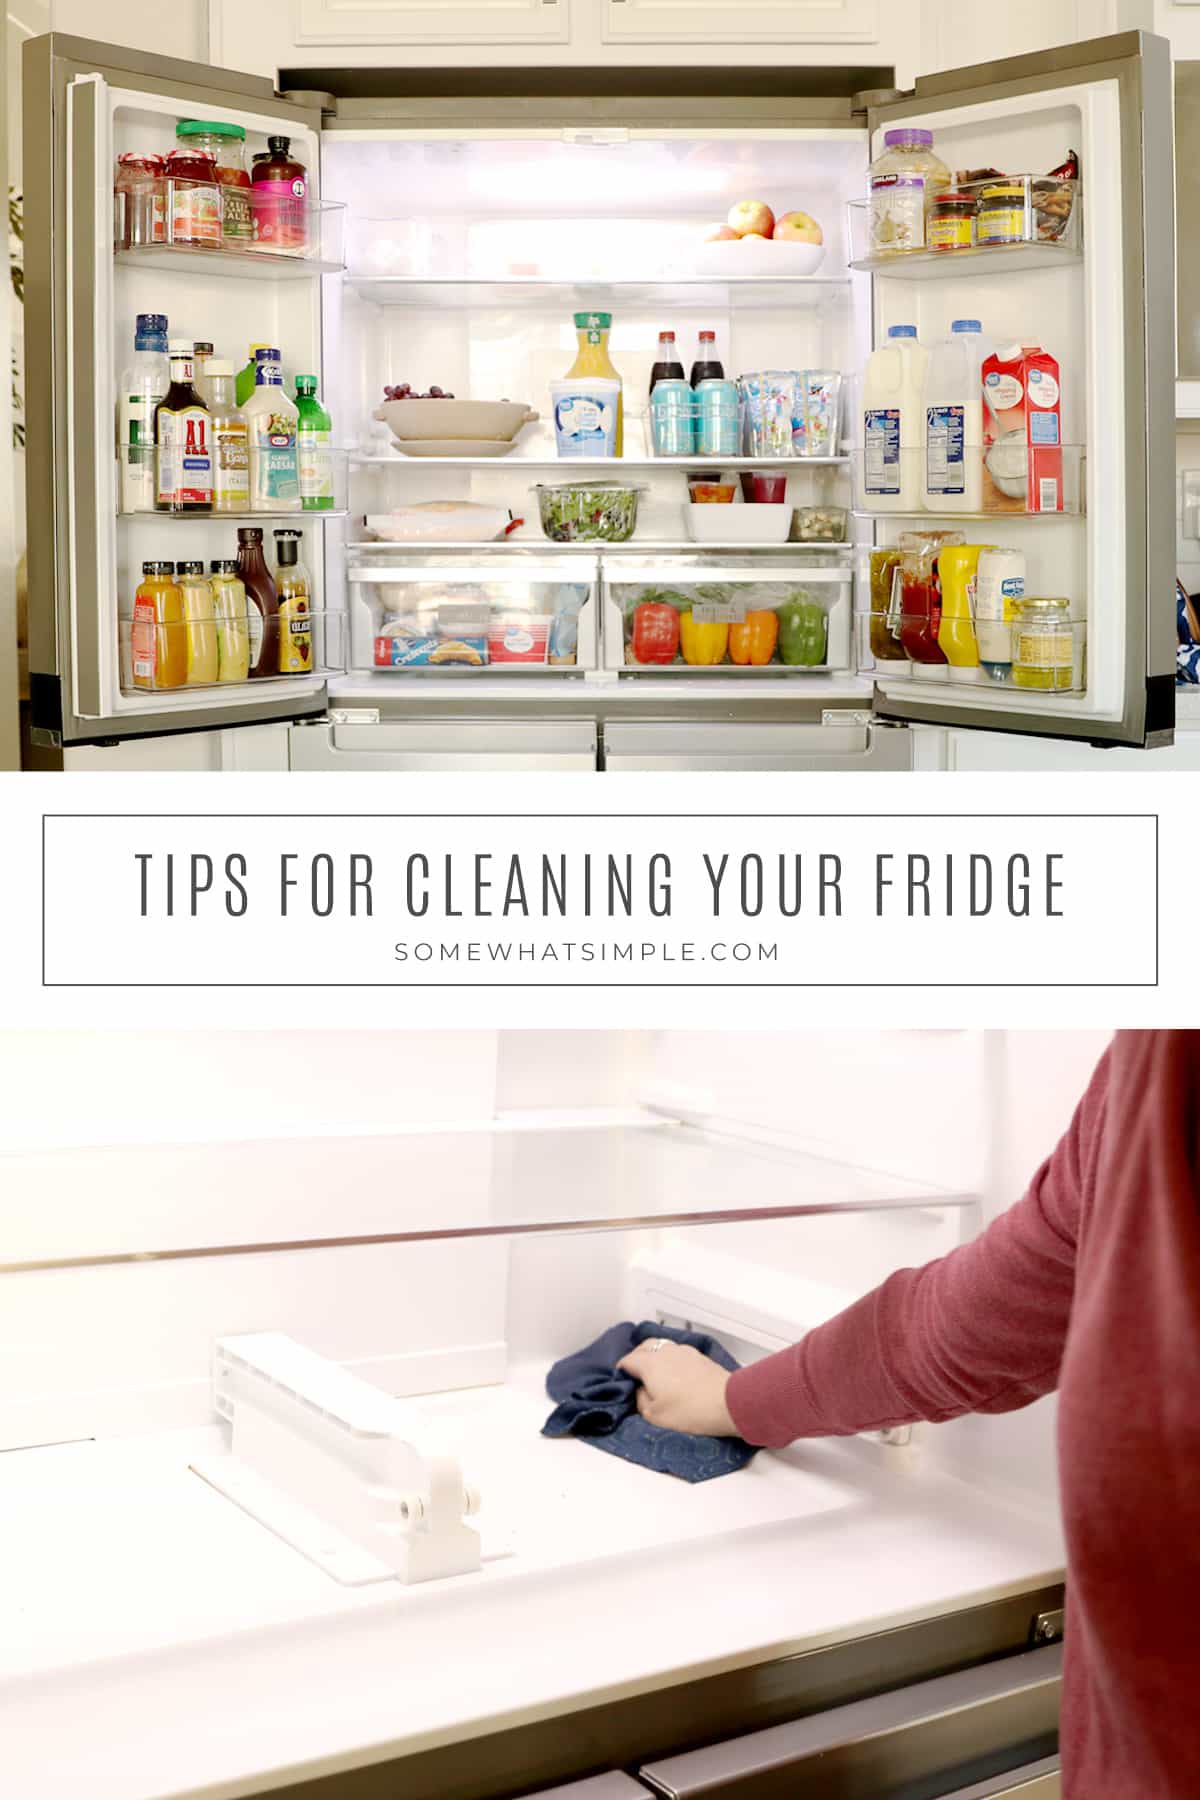 https://www.somewhatsimple.com/wp-content/uploads/2023/02/how-to-clean-your-fridge-easy.jpg